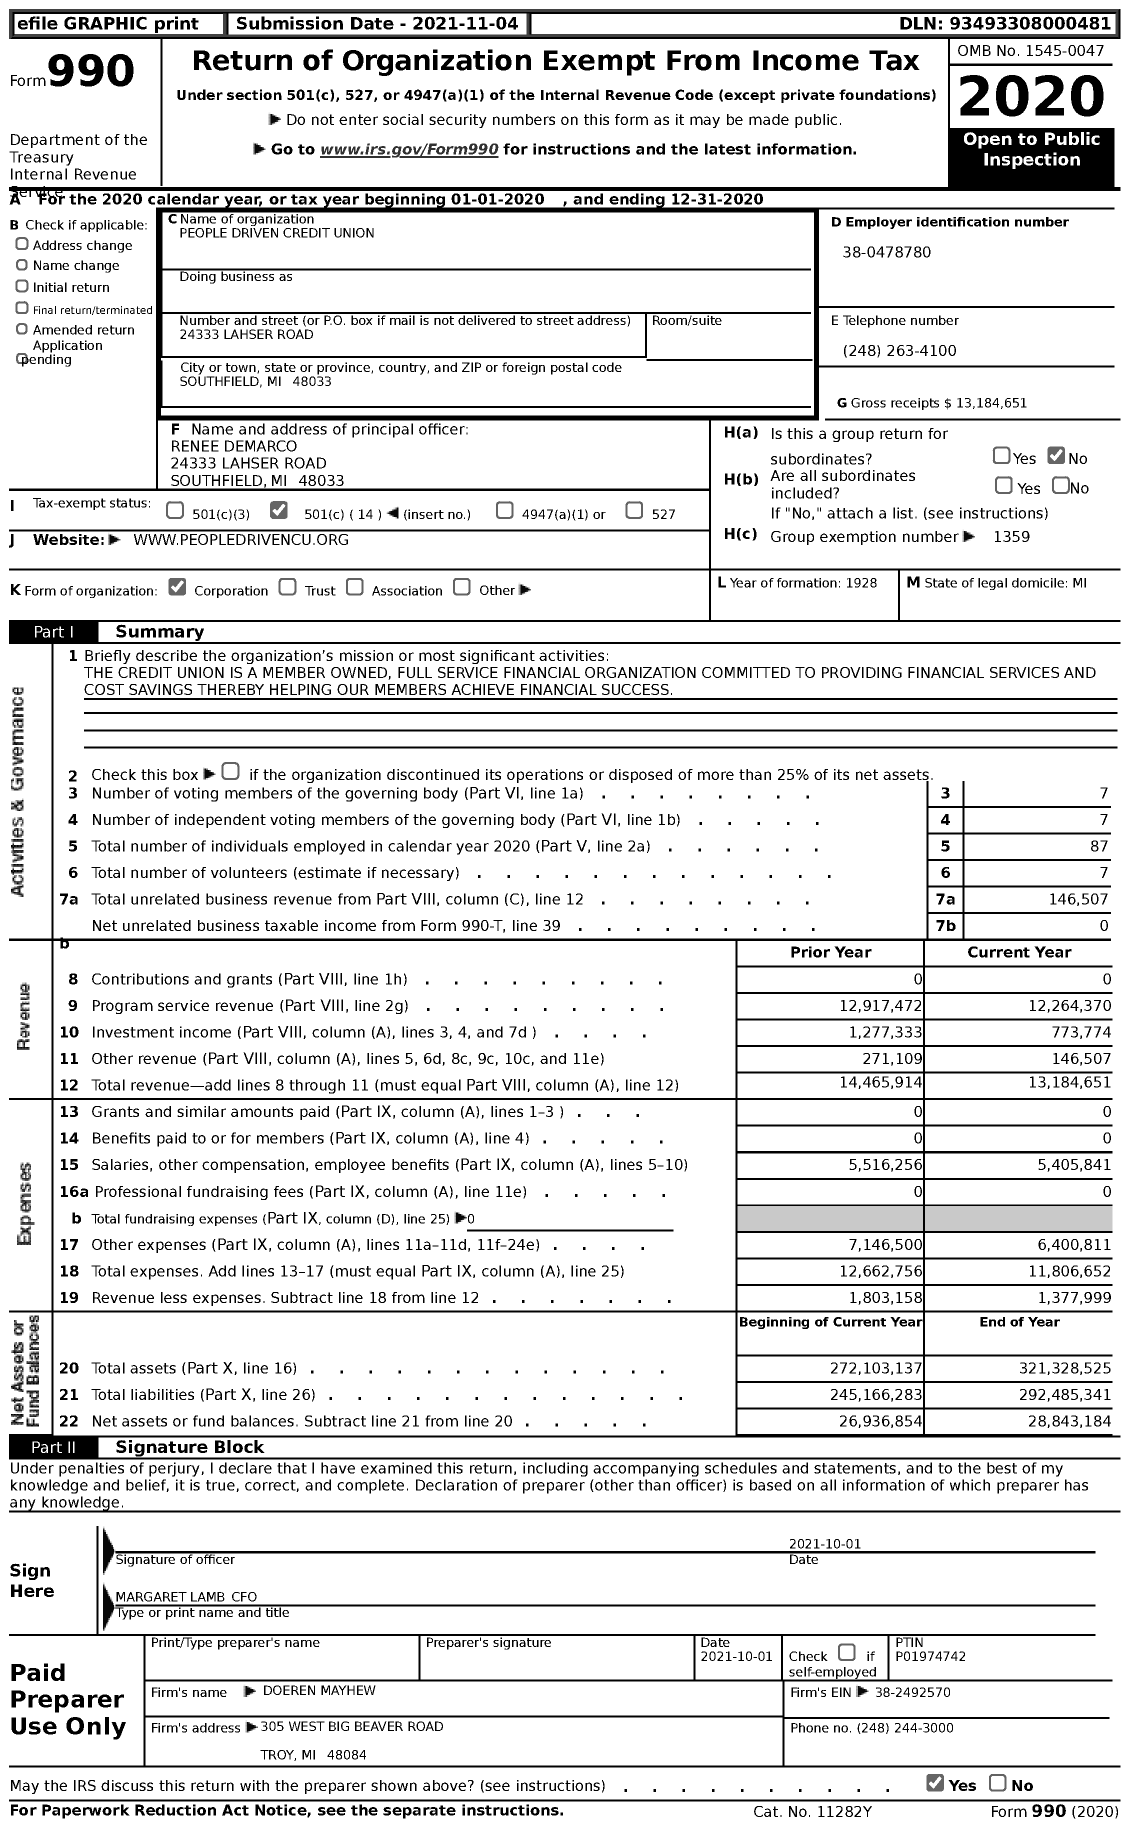 Image of first page of 2020 Form 990 for People Driven Credit Union (PDCU)